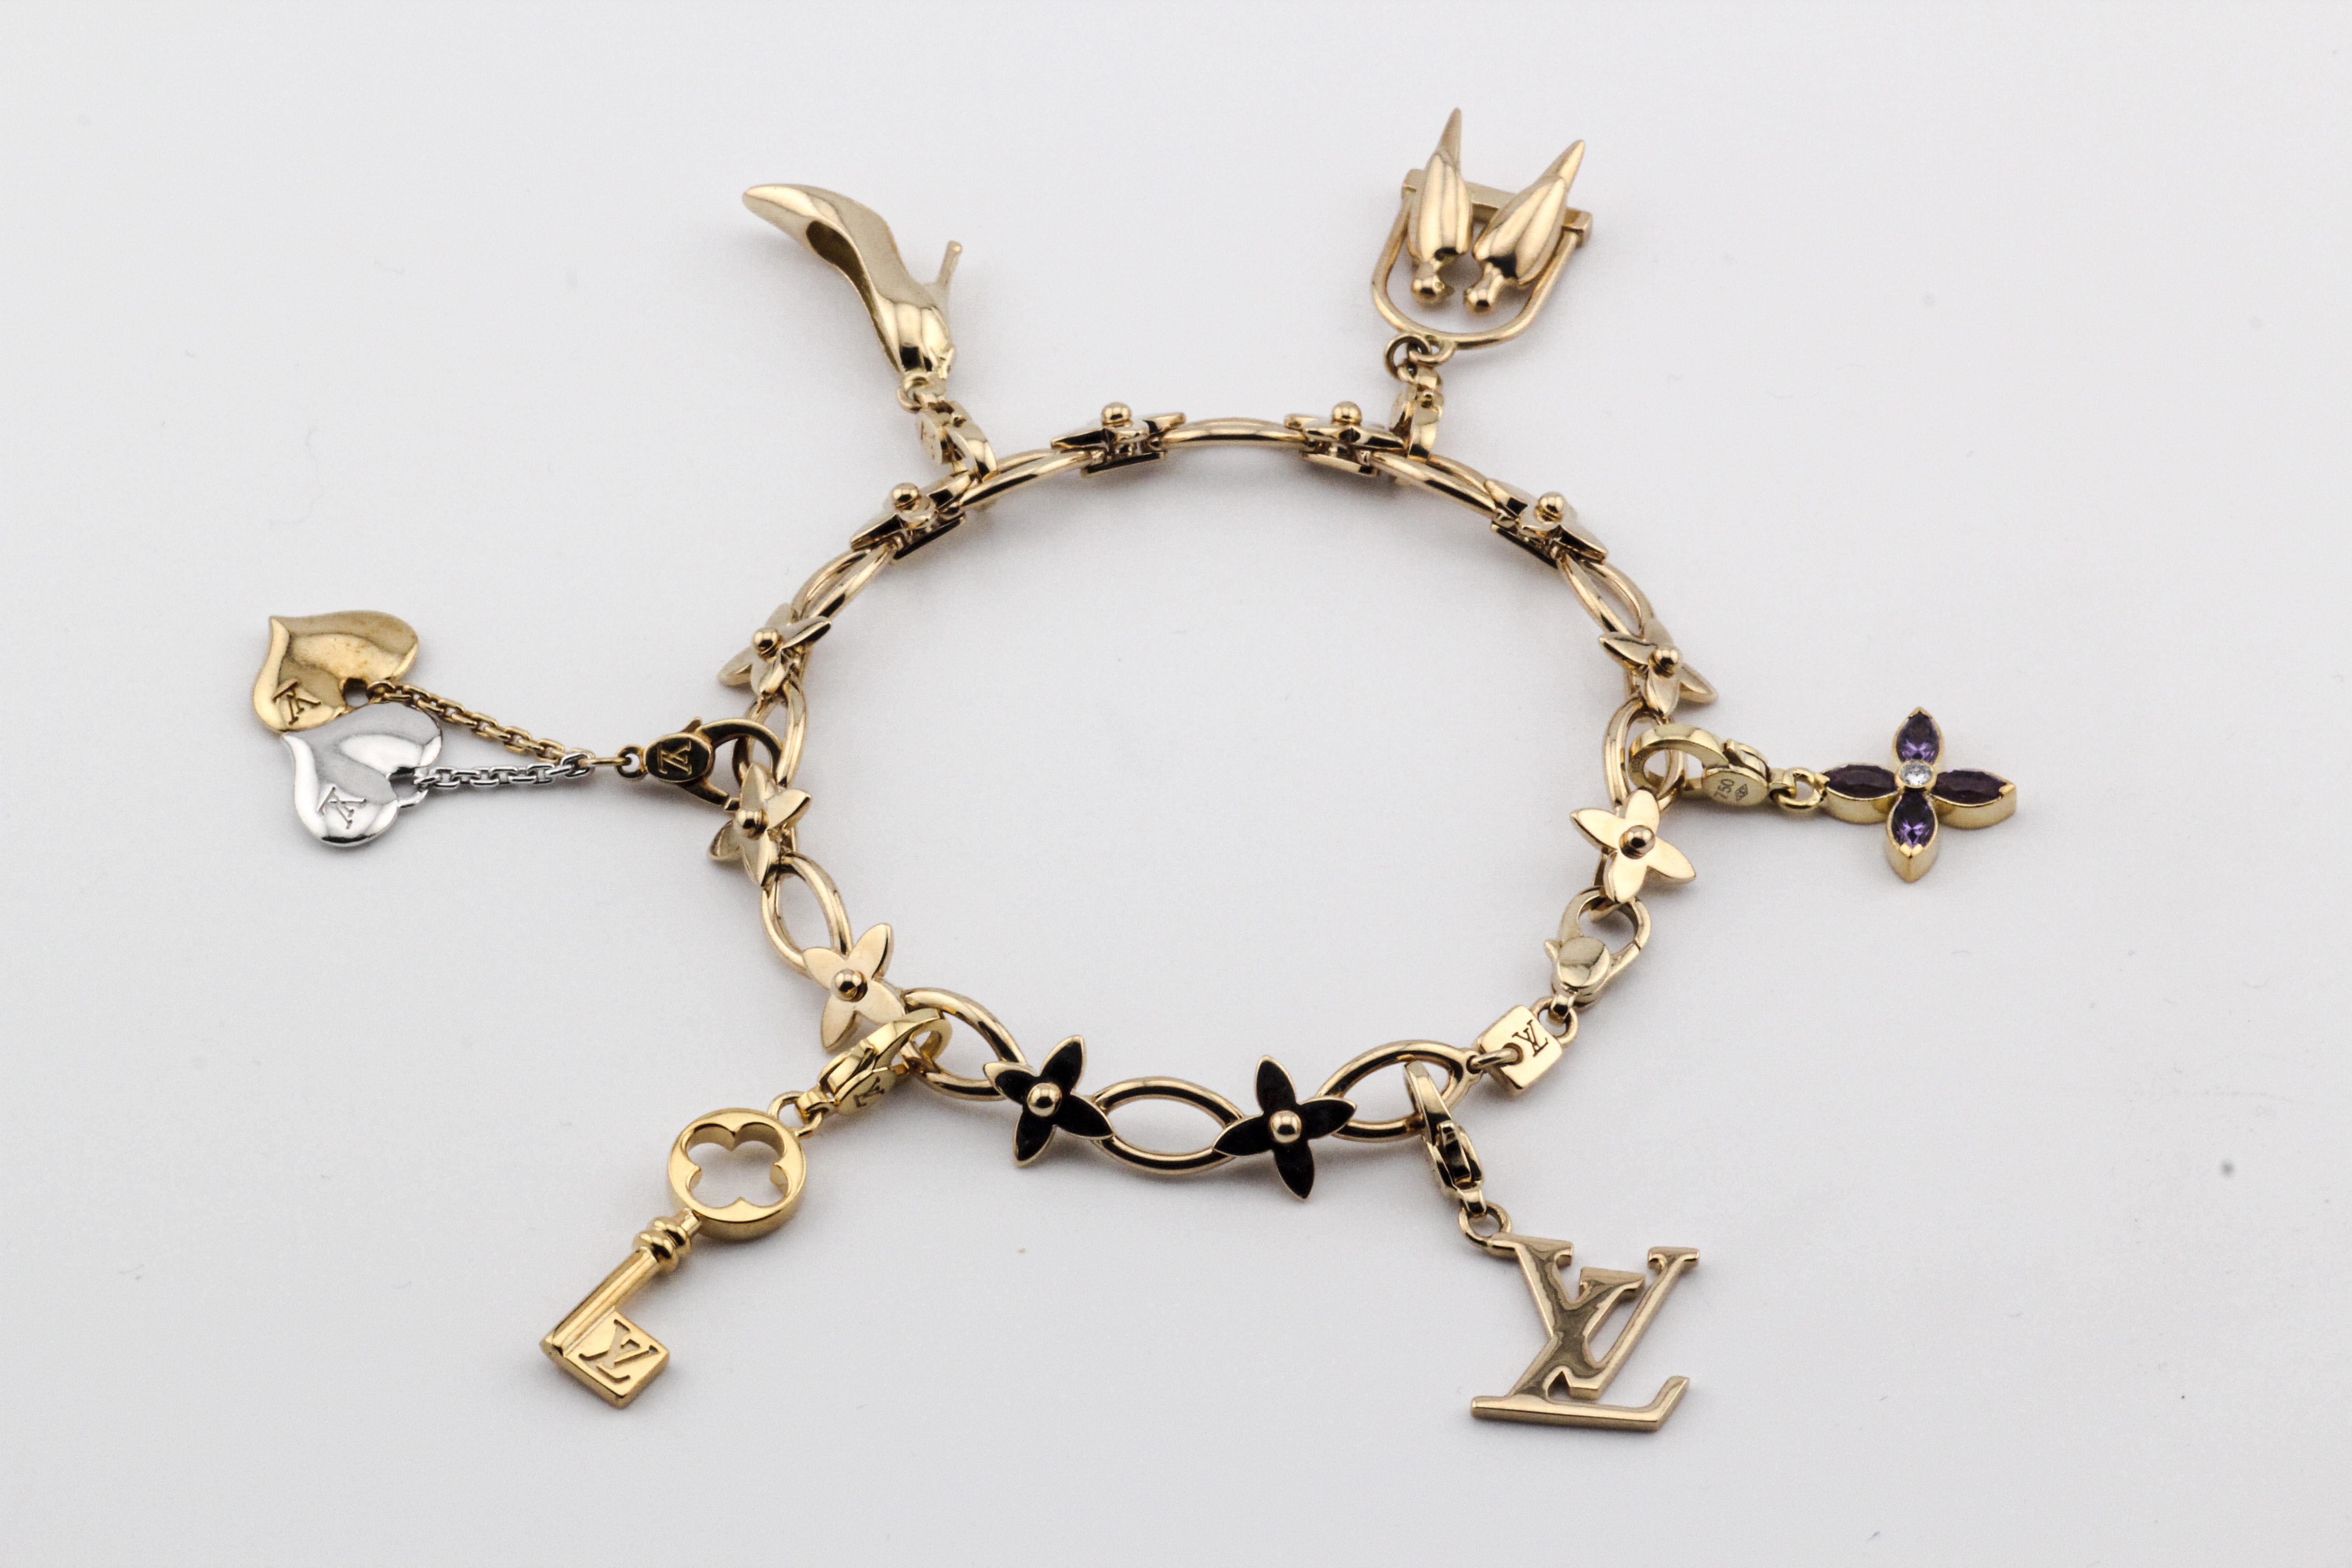 The Louis Vuitton 18K Gold 6 Charms Bracelet is a dazzling testament to the brand's signature blend of luxury and creativity. Crafted from the finest 18K gold, this exquisite bracelet features an array of charming motifs that add a whimsical touch